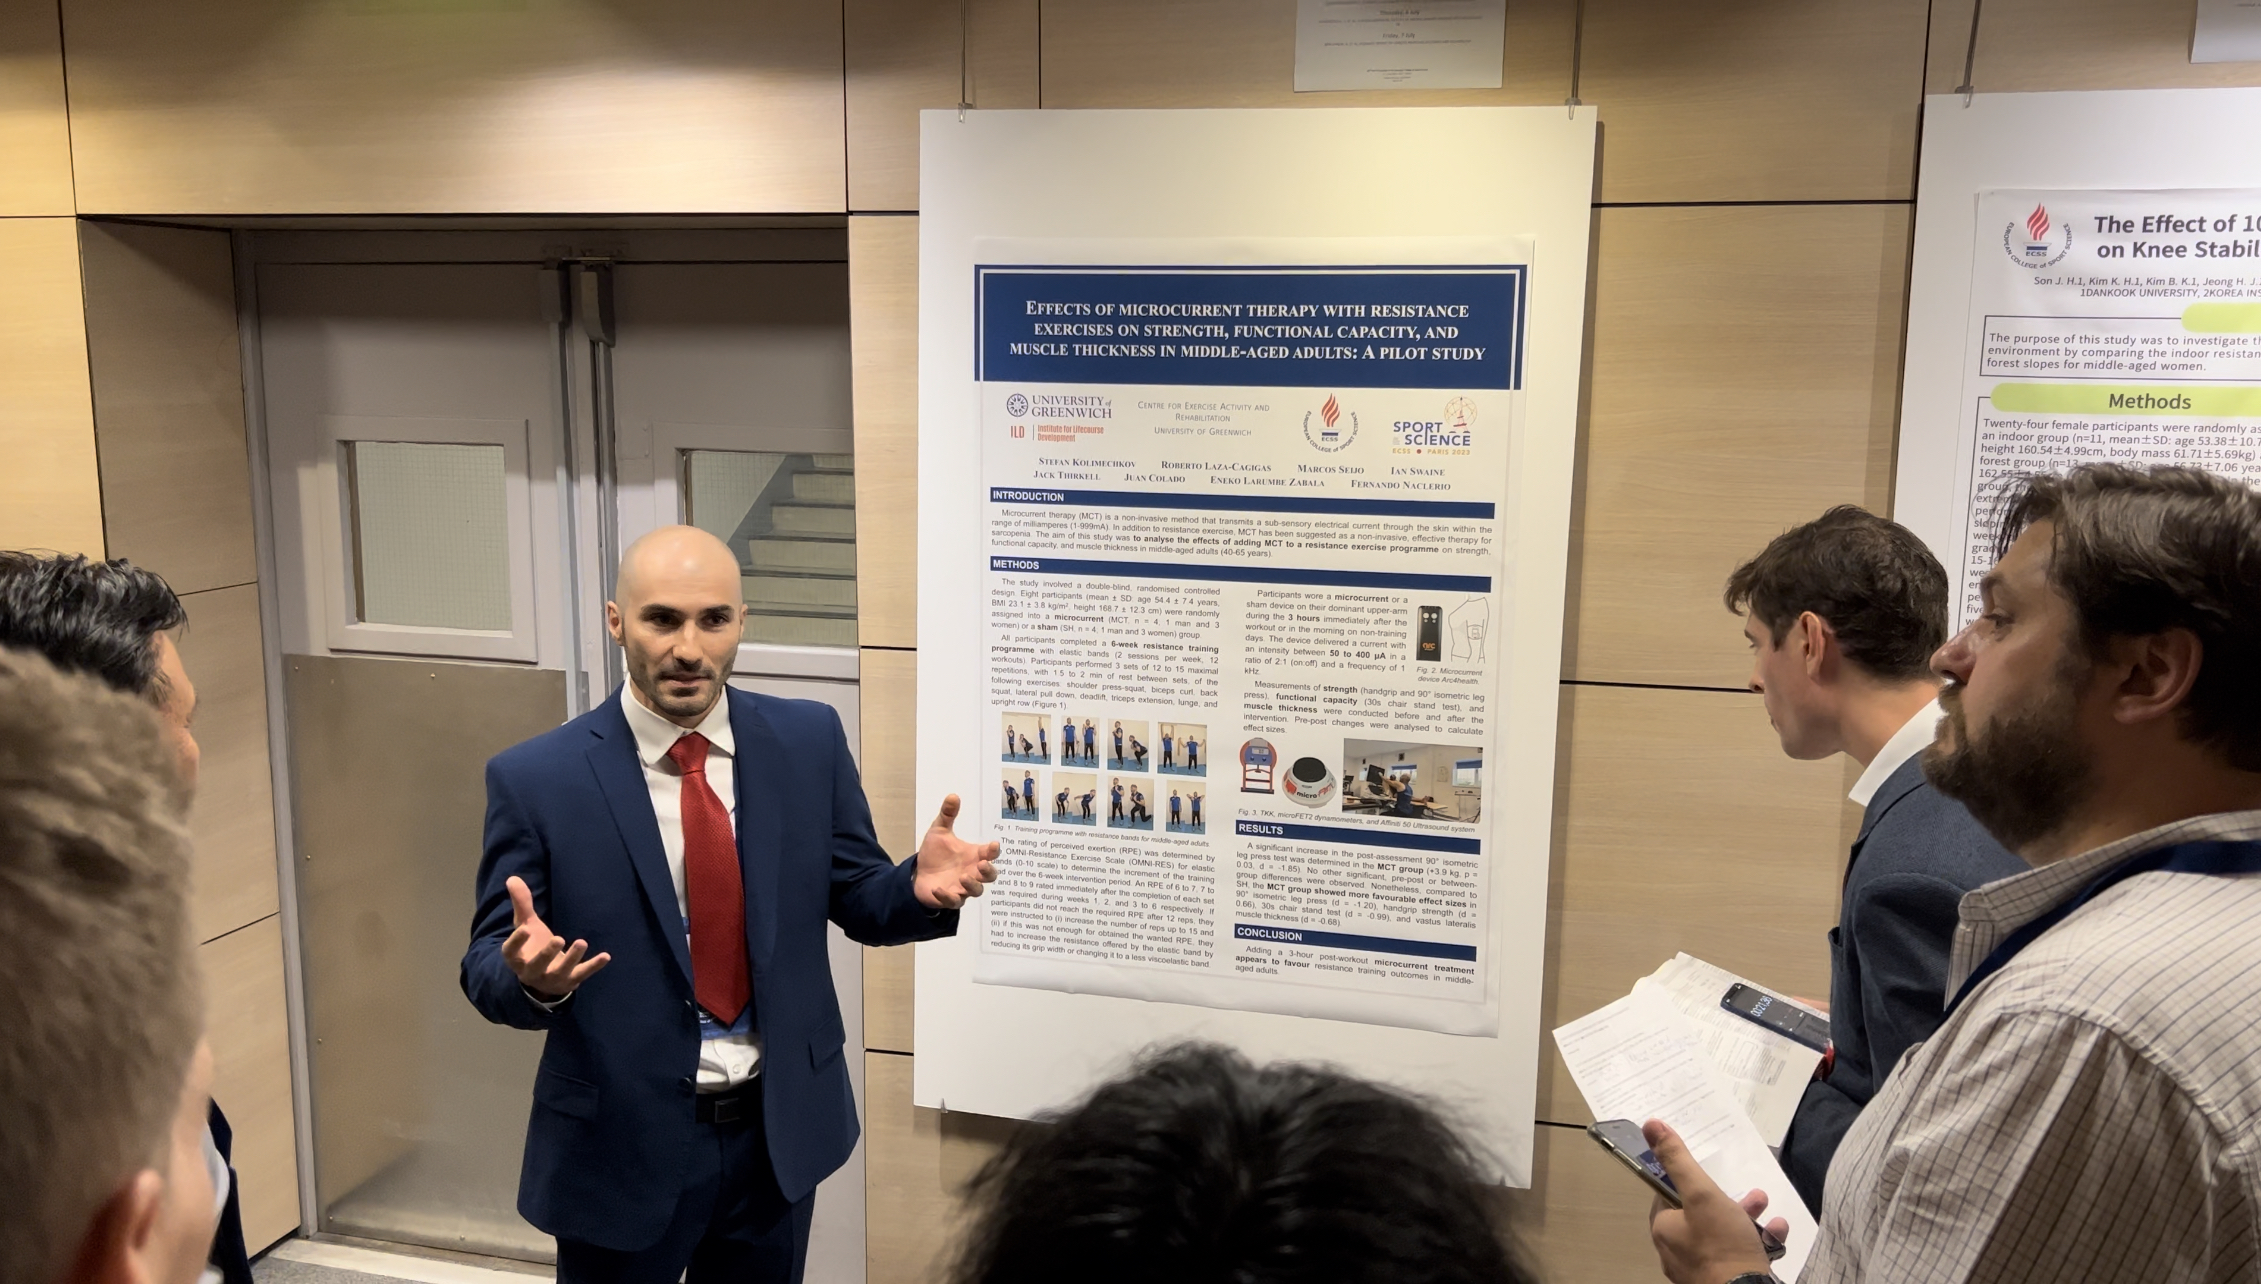 Dr Stefan Kolimechkov representing the CEAR at the ILD (University of Greenwich) presenting a poster at the ECSS 2023